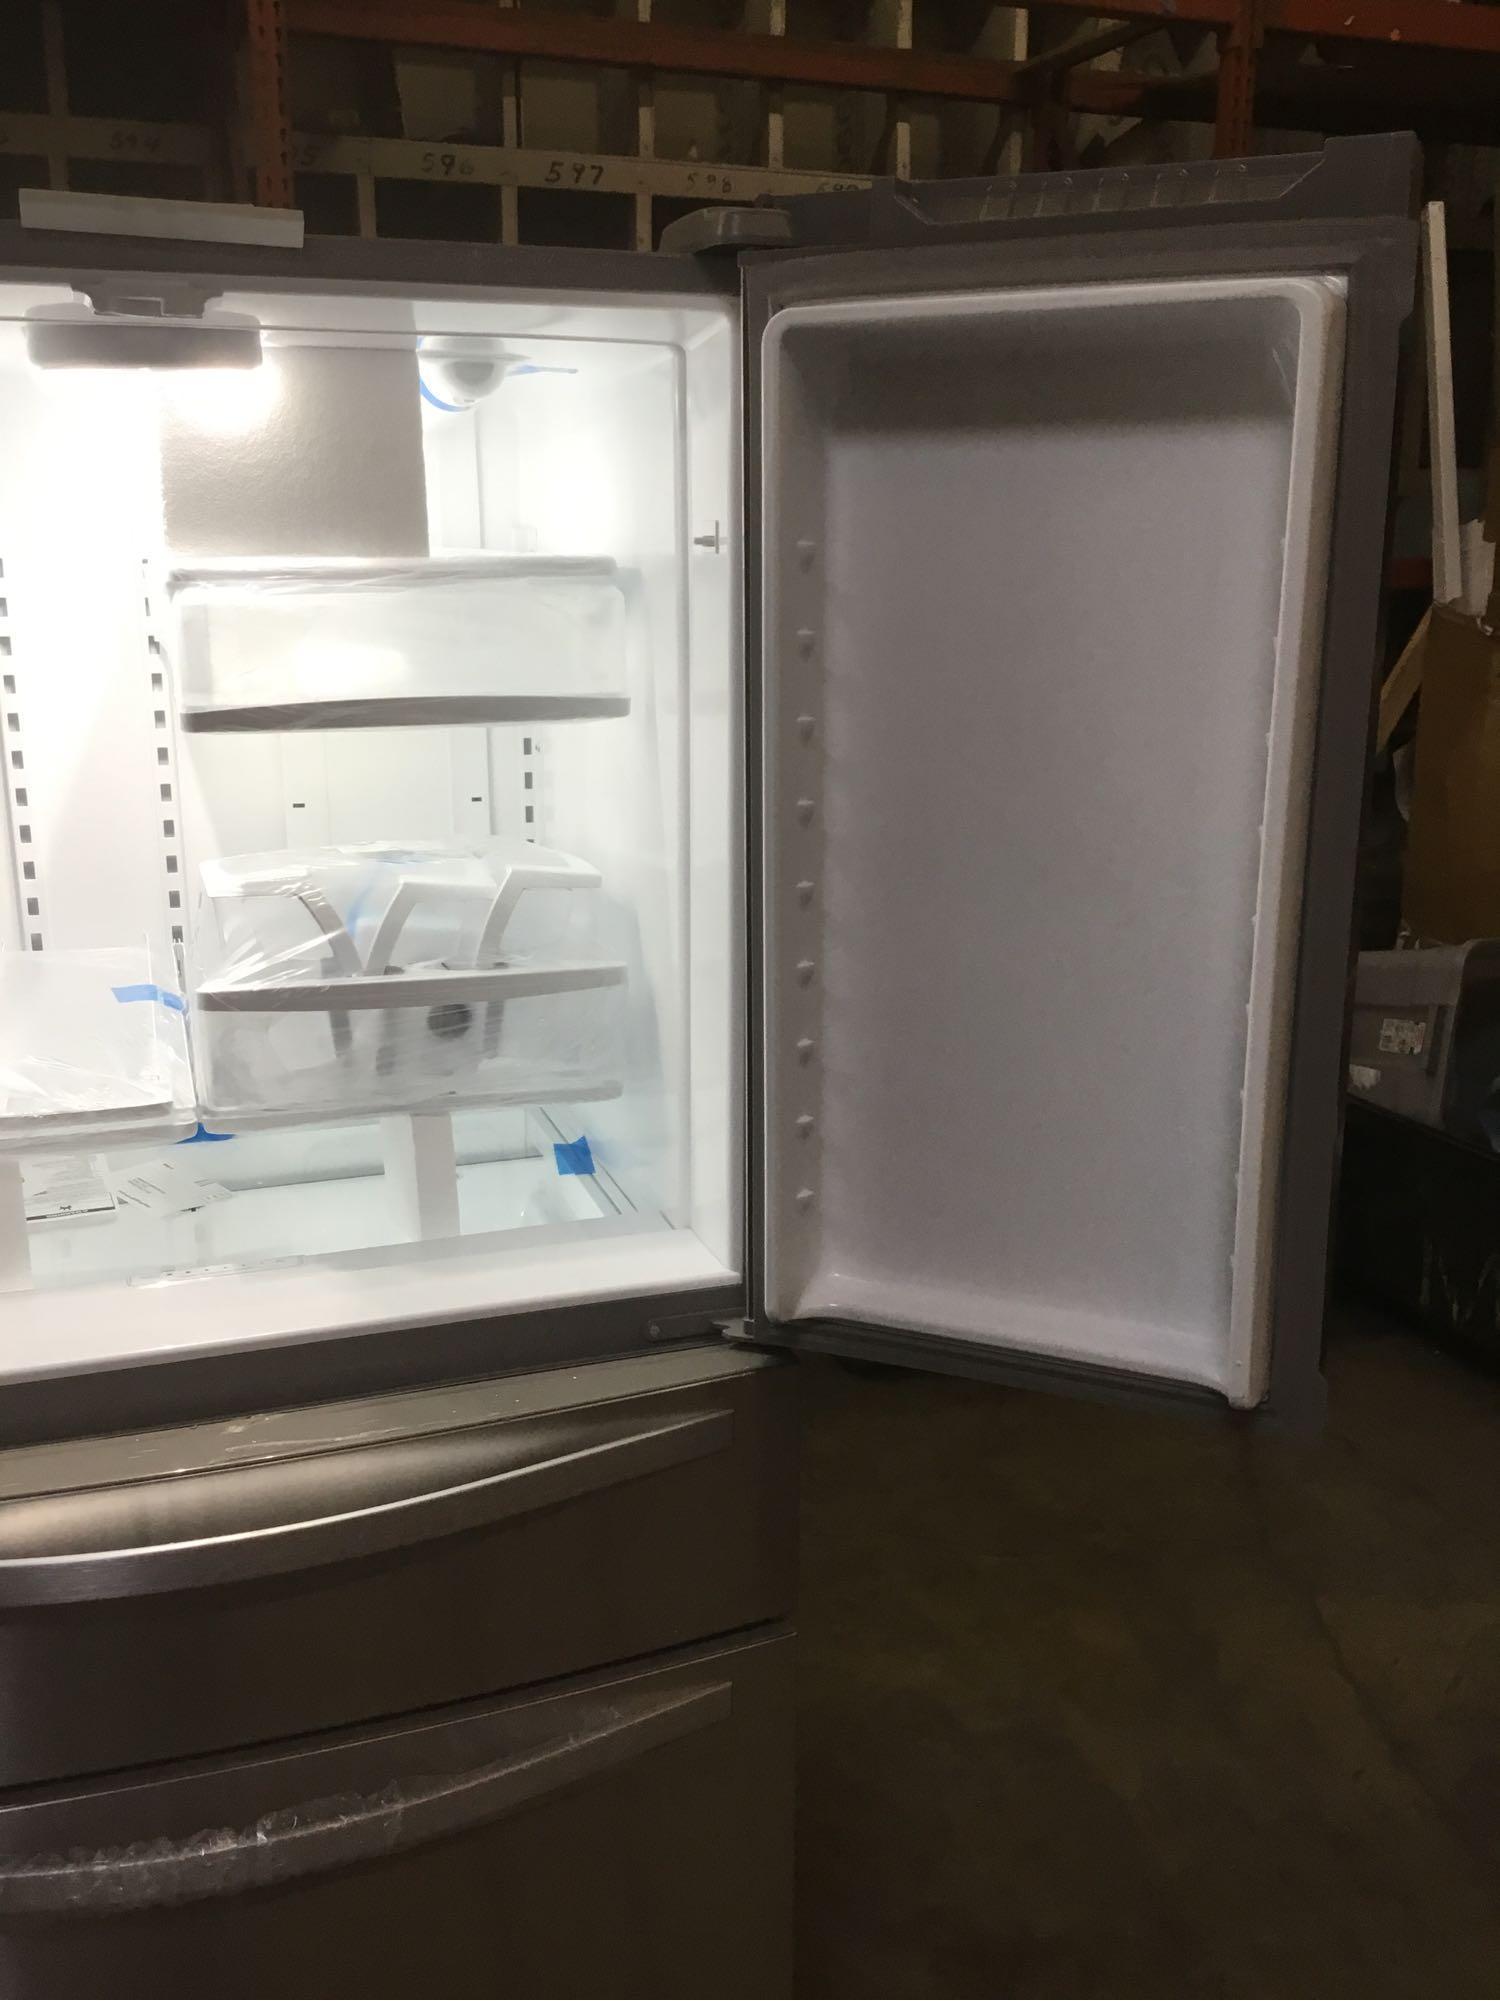 Samsung 24.5 cu. ft. Side-By-Side Refrigerator with In-Door Ice Maker**GETS COLD**